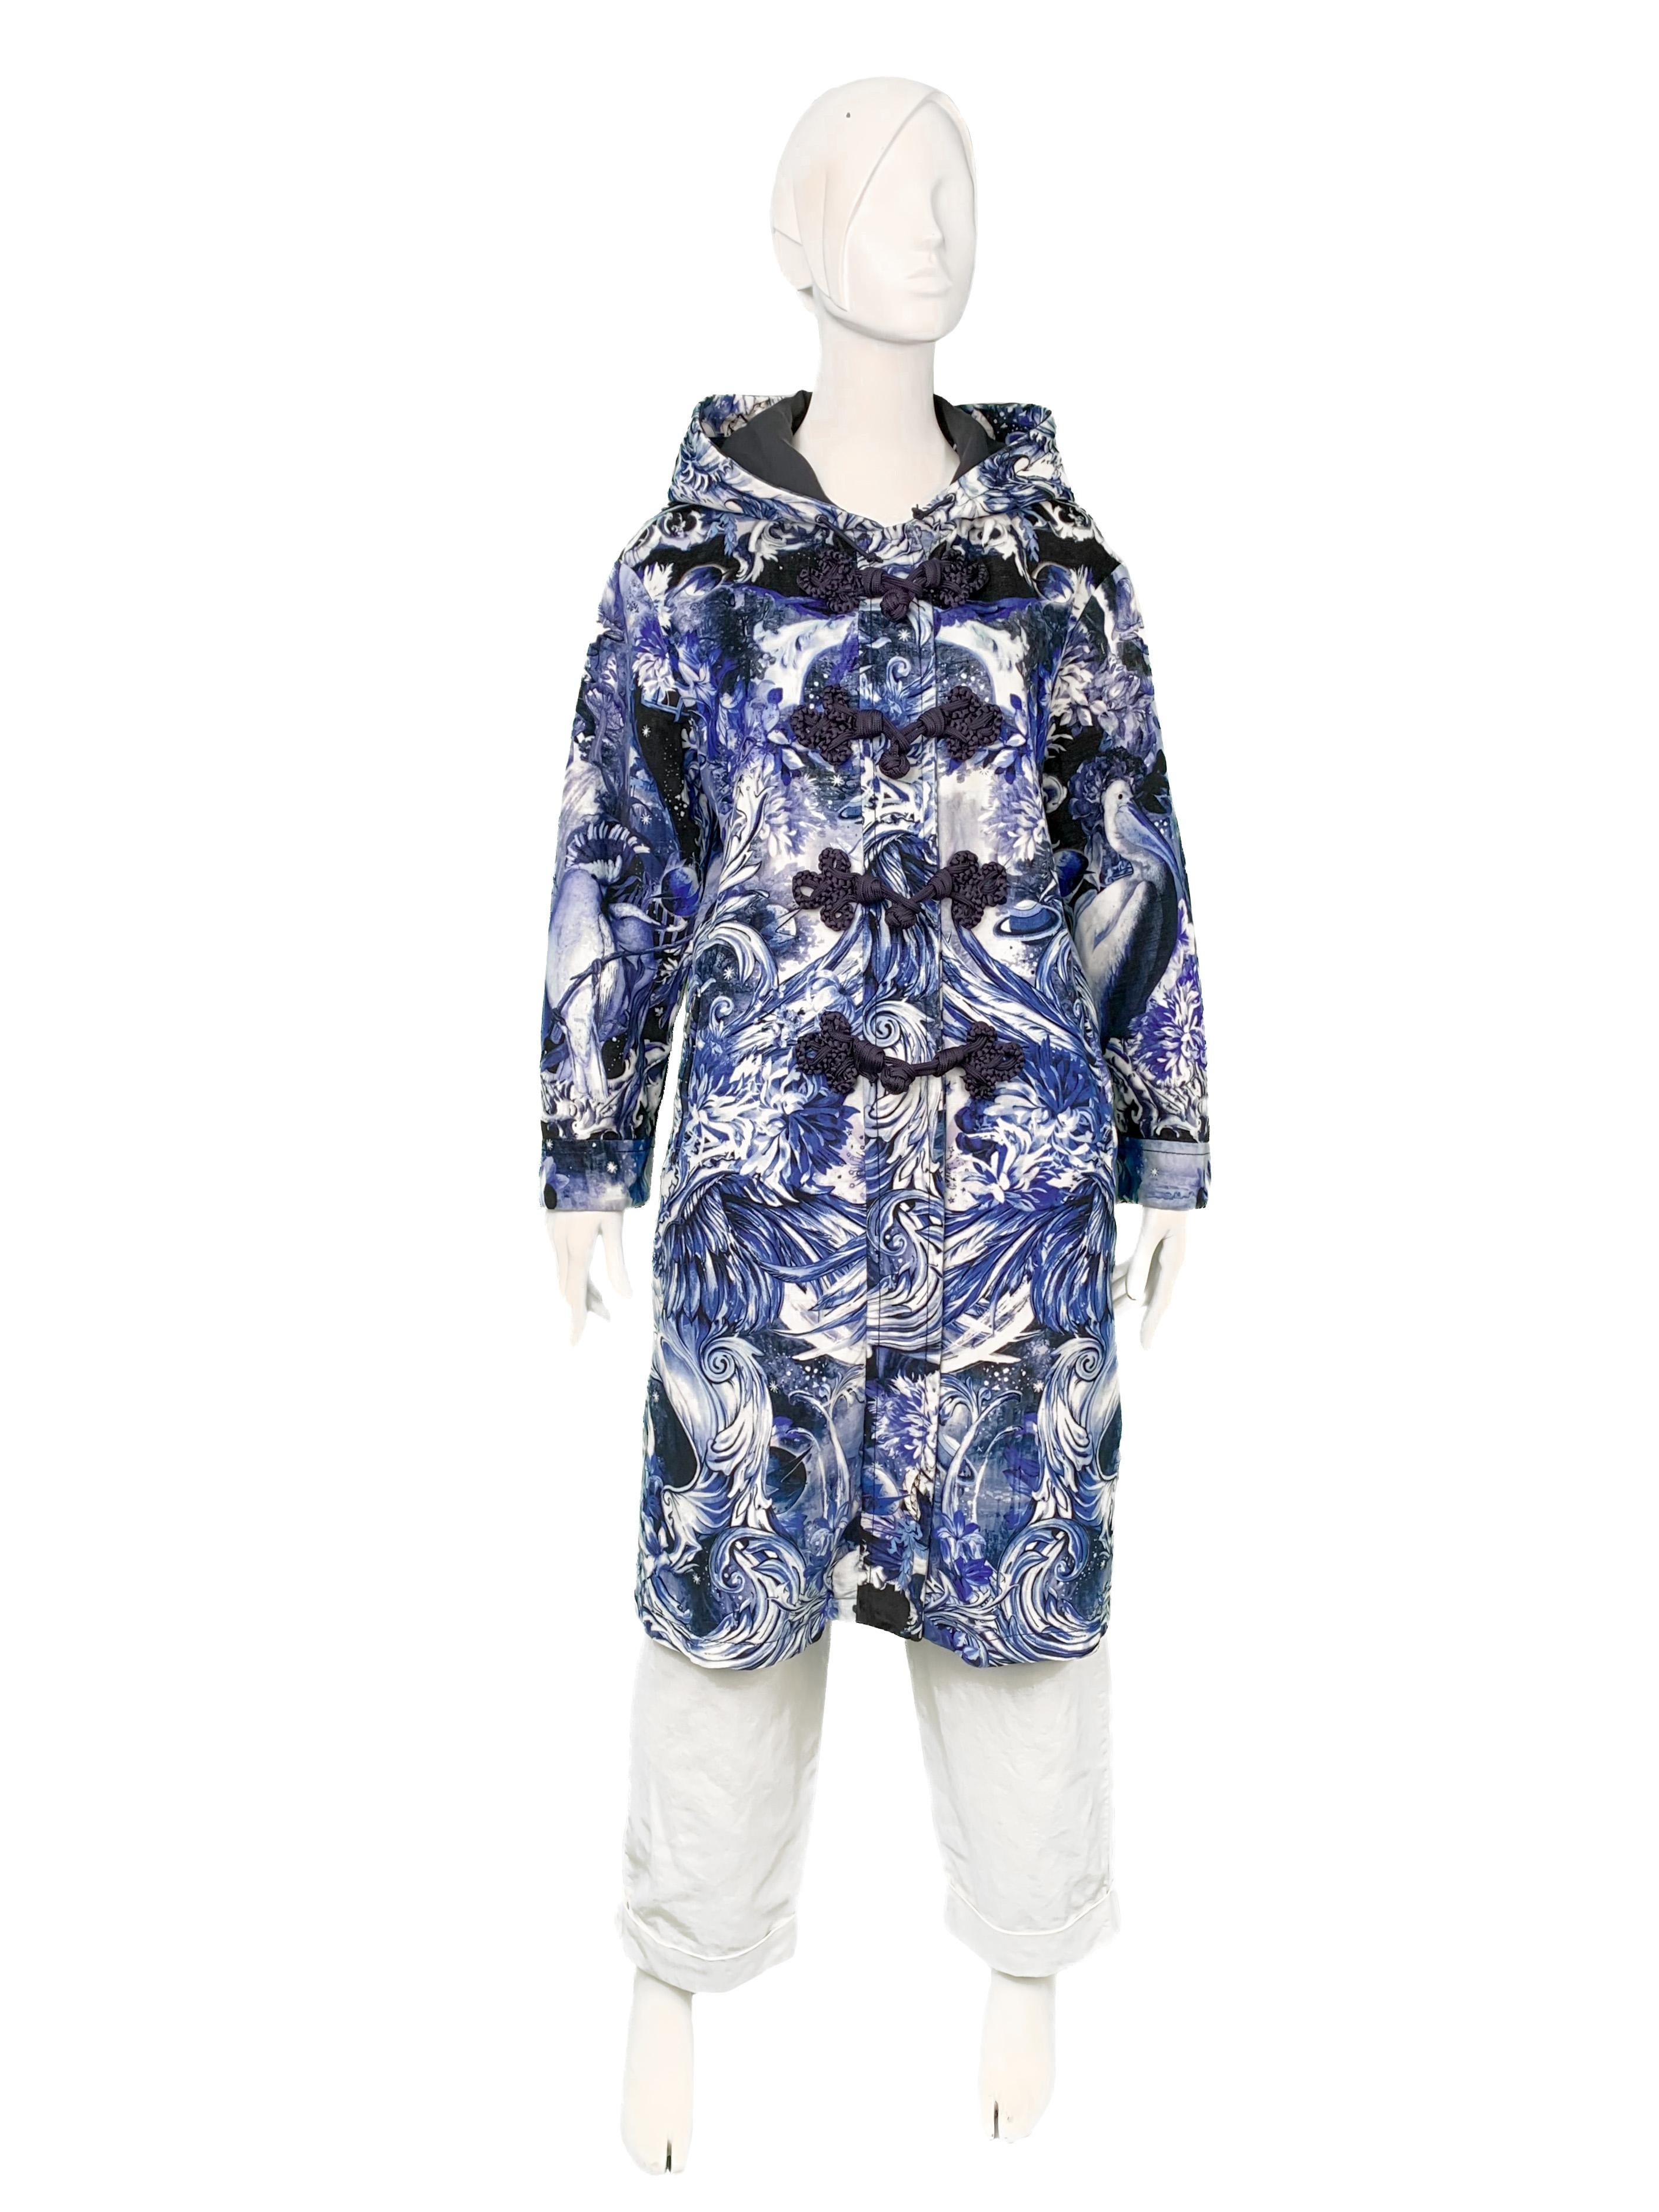 Roberto Cavalli mid-2010s velvet hooded lightweight hooded coat/jacket with a blue porcelain-inspired painterly-effect baroque print of an esoteric garden with flowers, leaves, mushrooms, exotic birds, eyes, planets, and antique statues intertwined